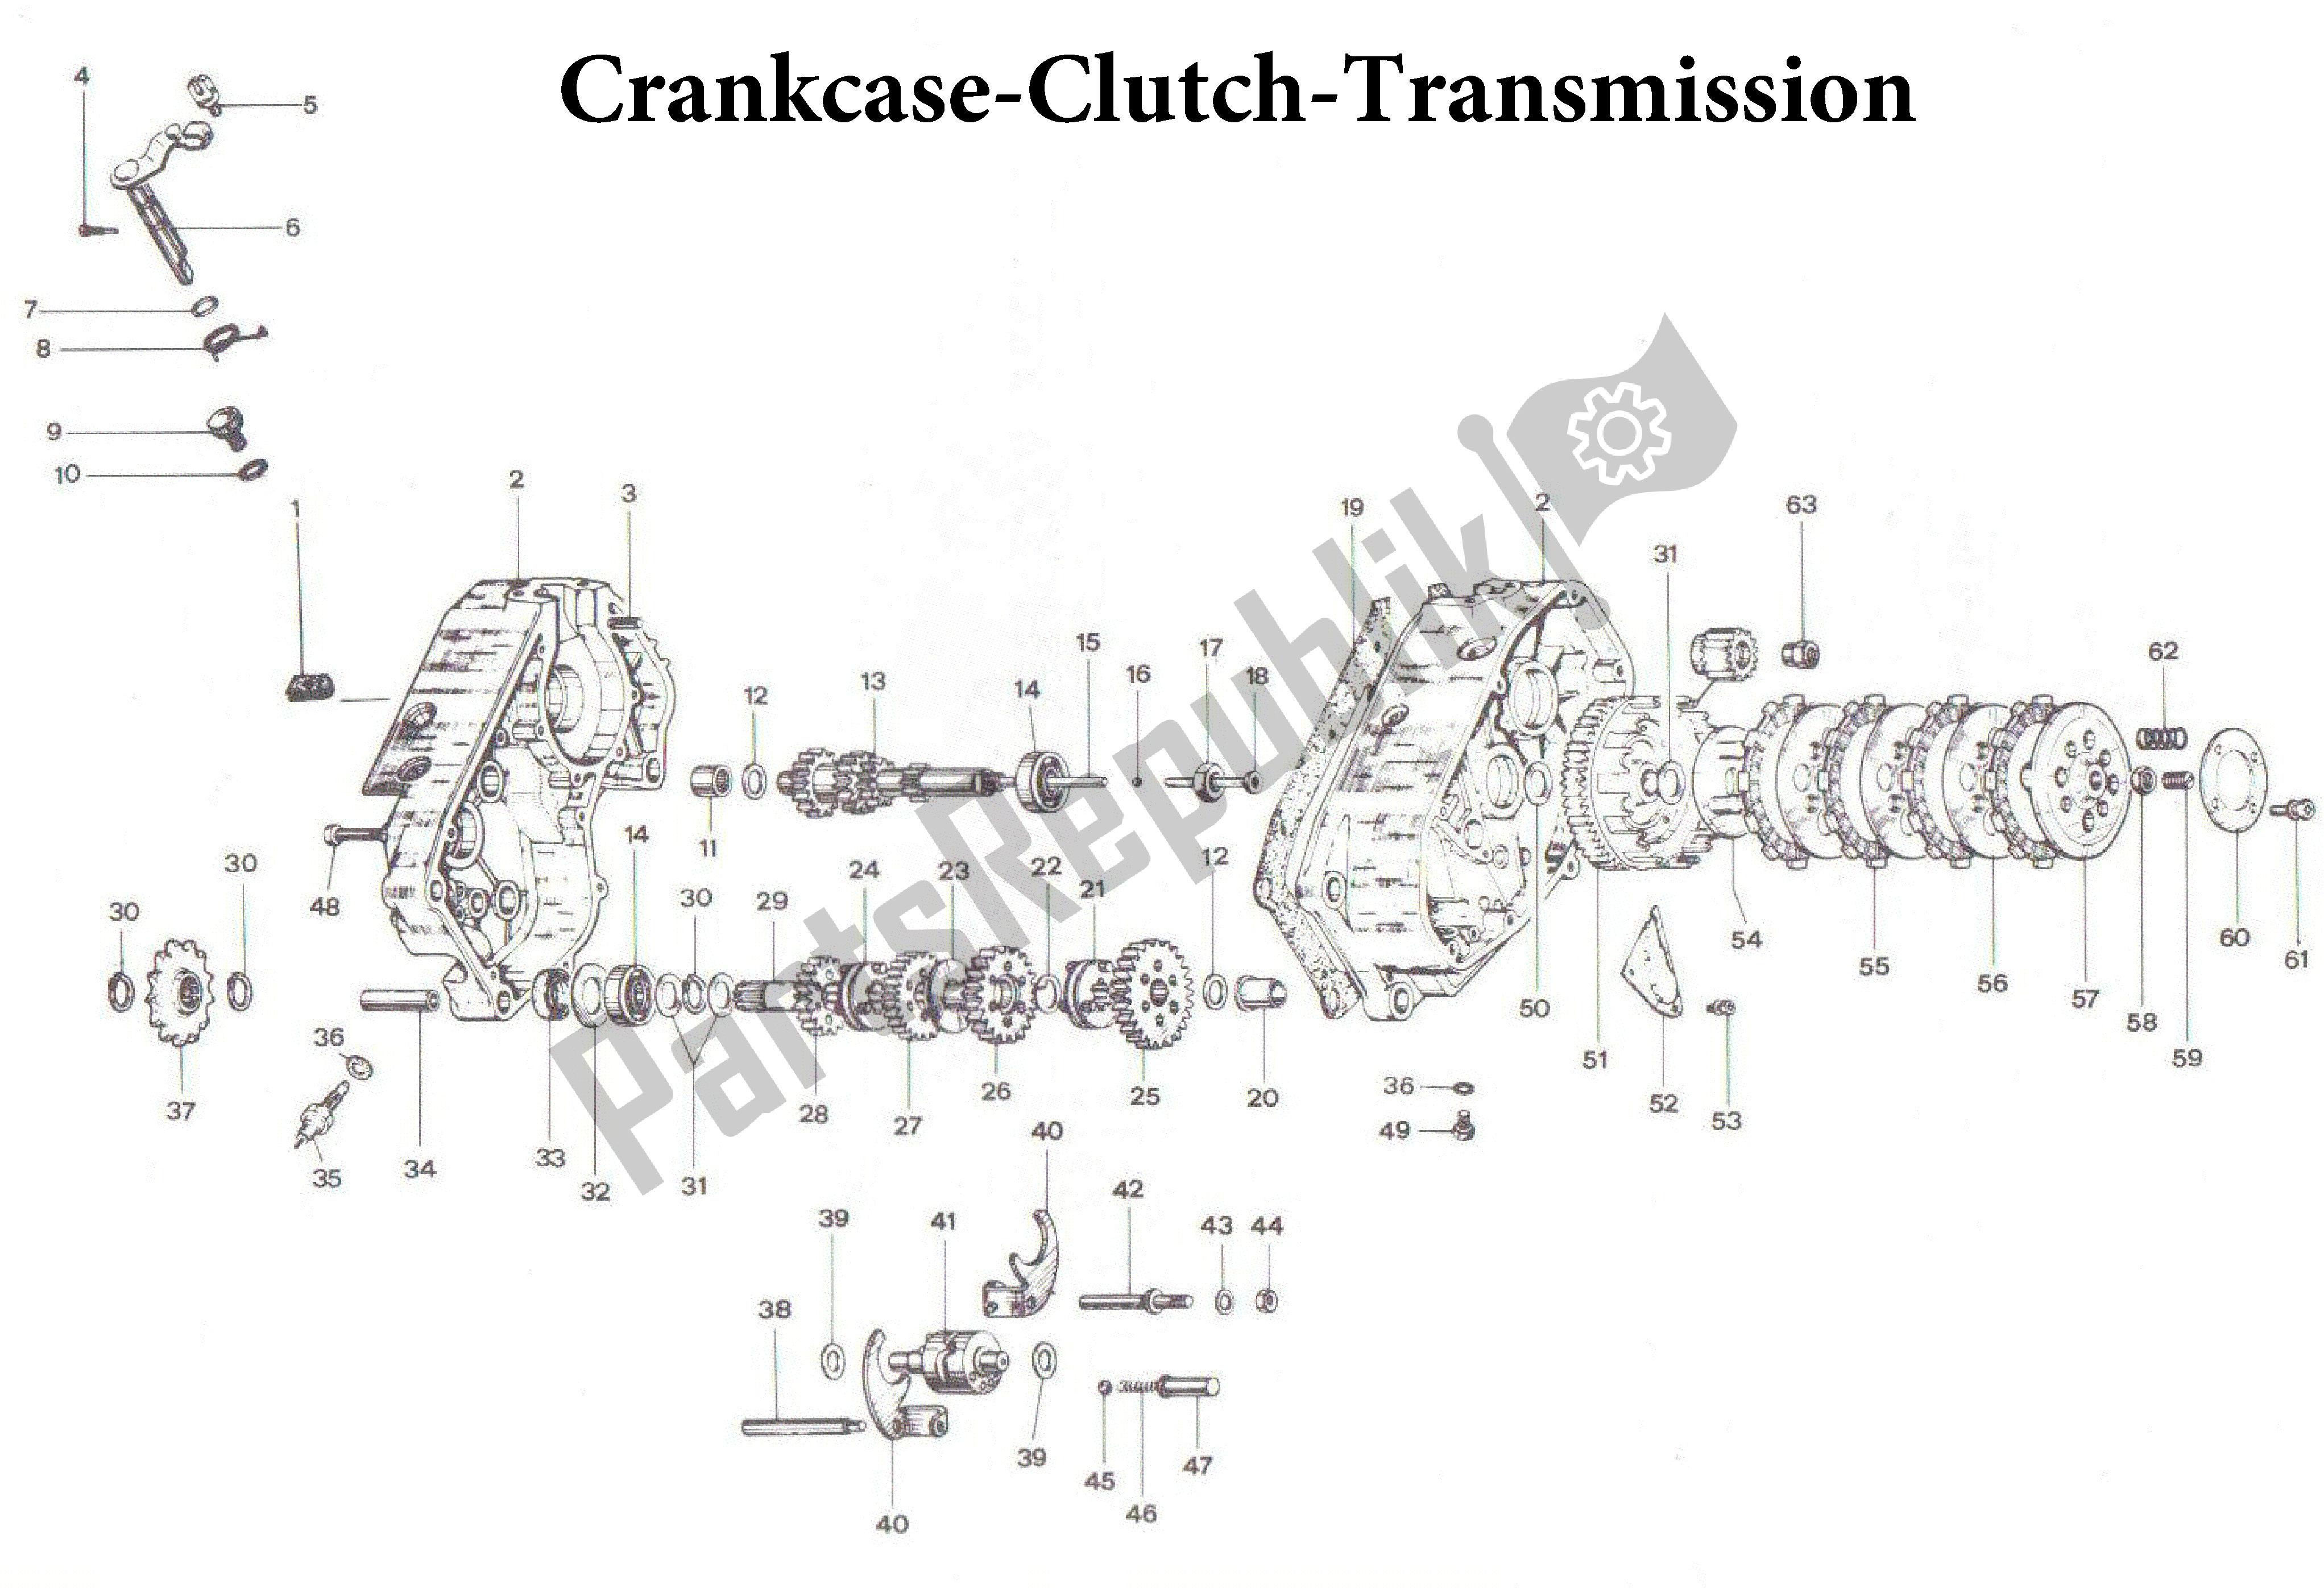 All parts for the Crankcase-clutch-transmission of the Aprilia AF1 50 1990